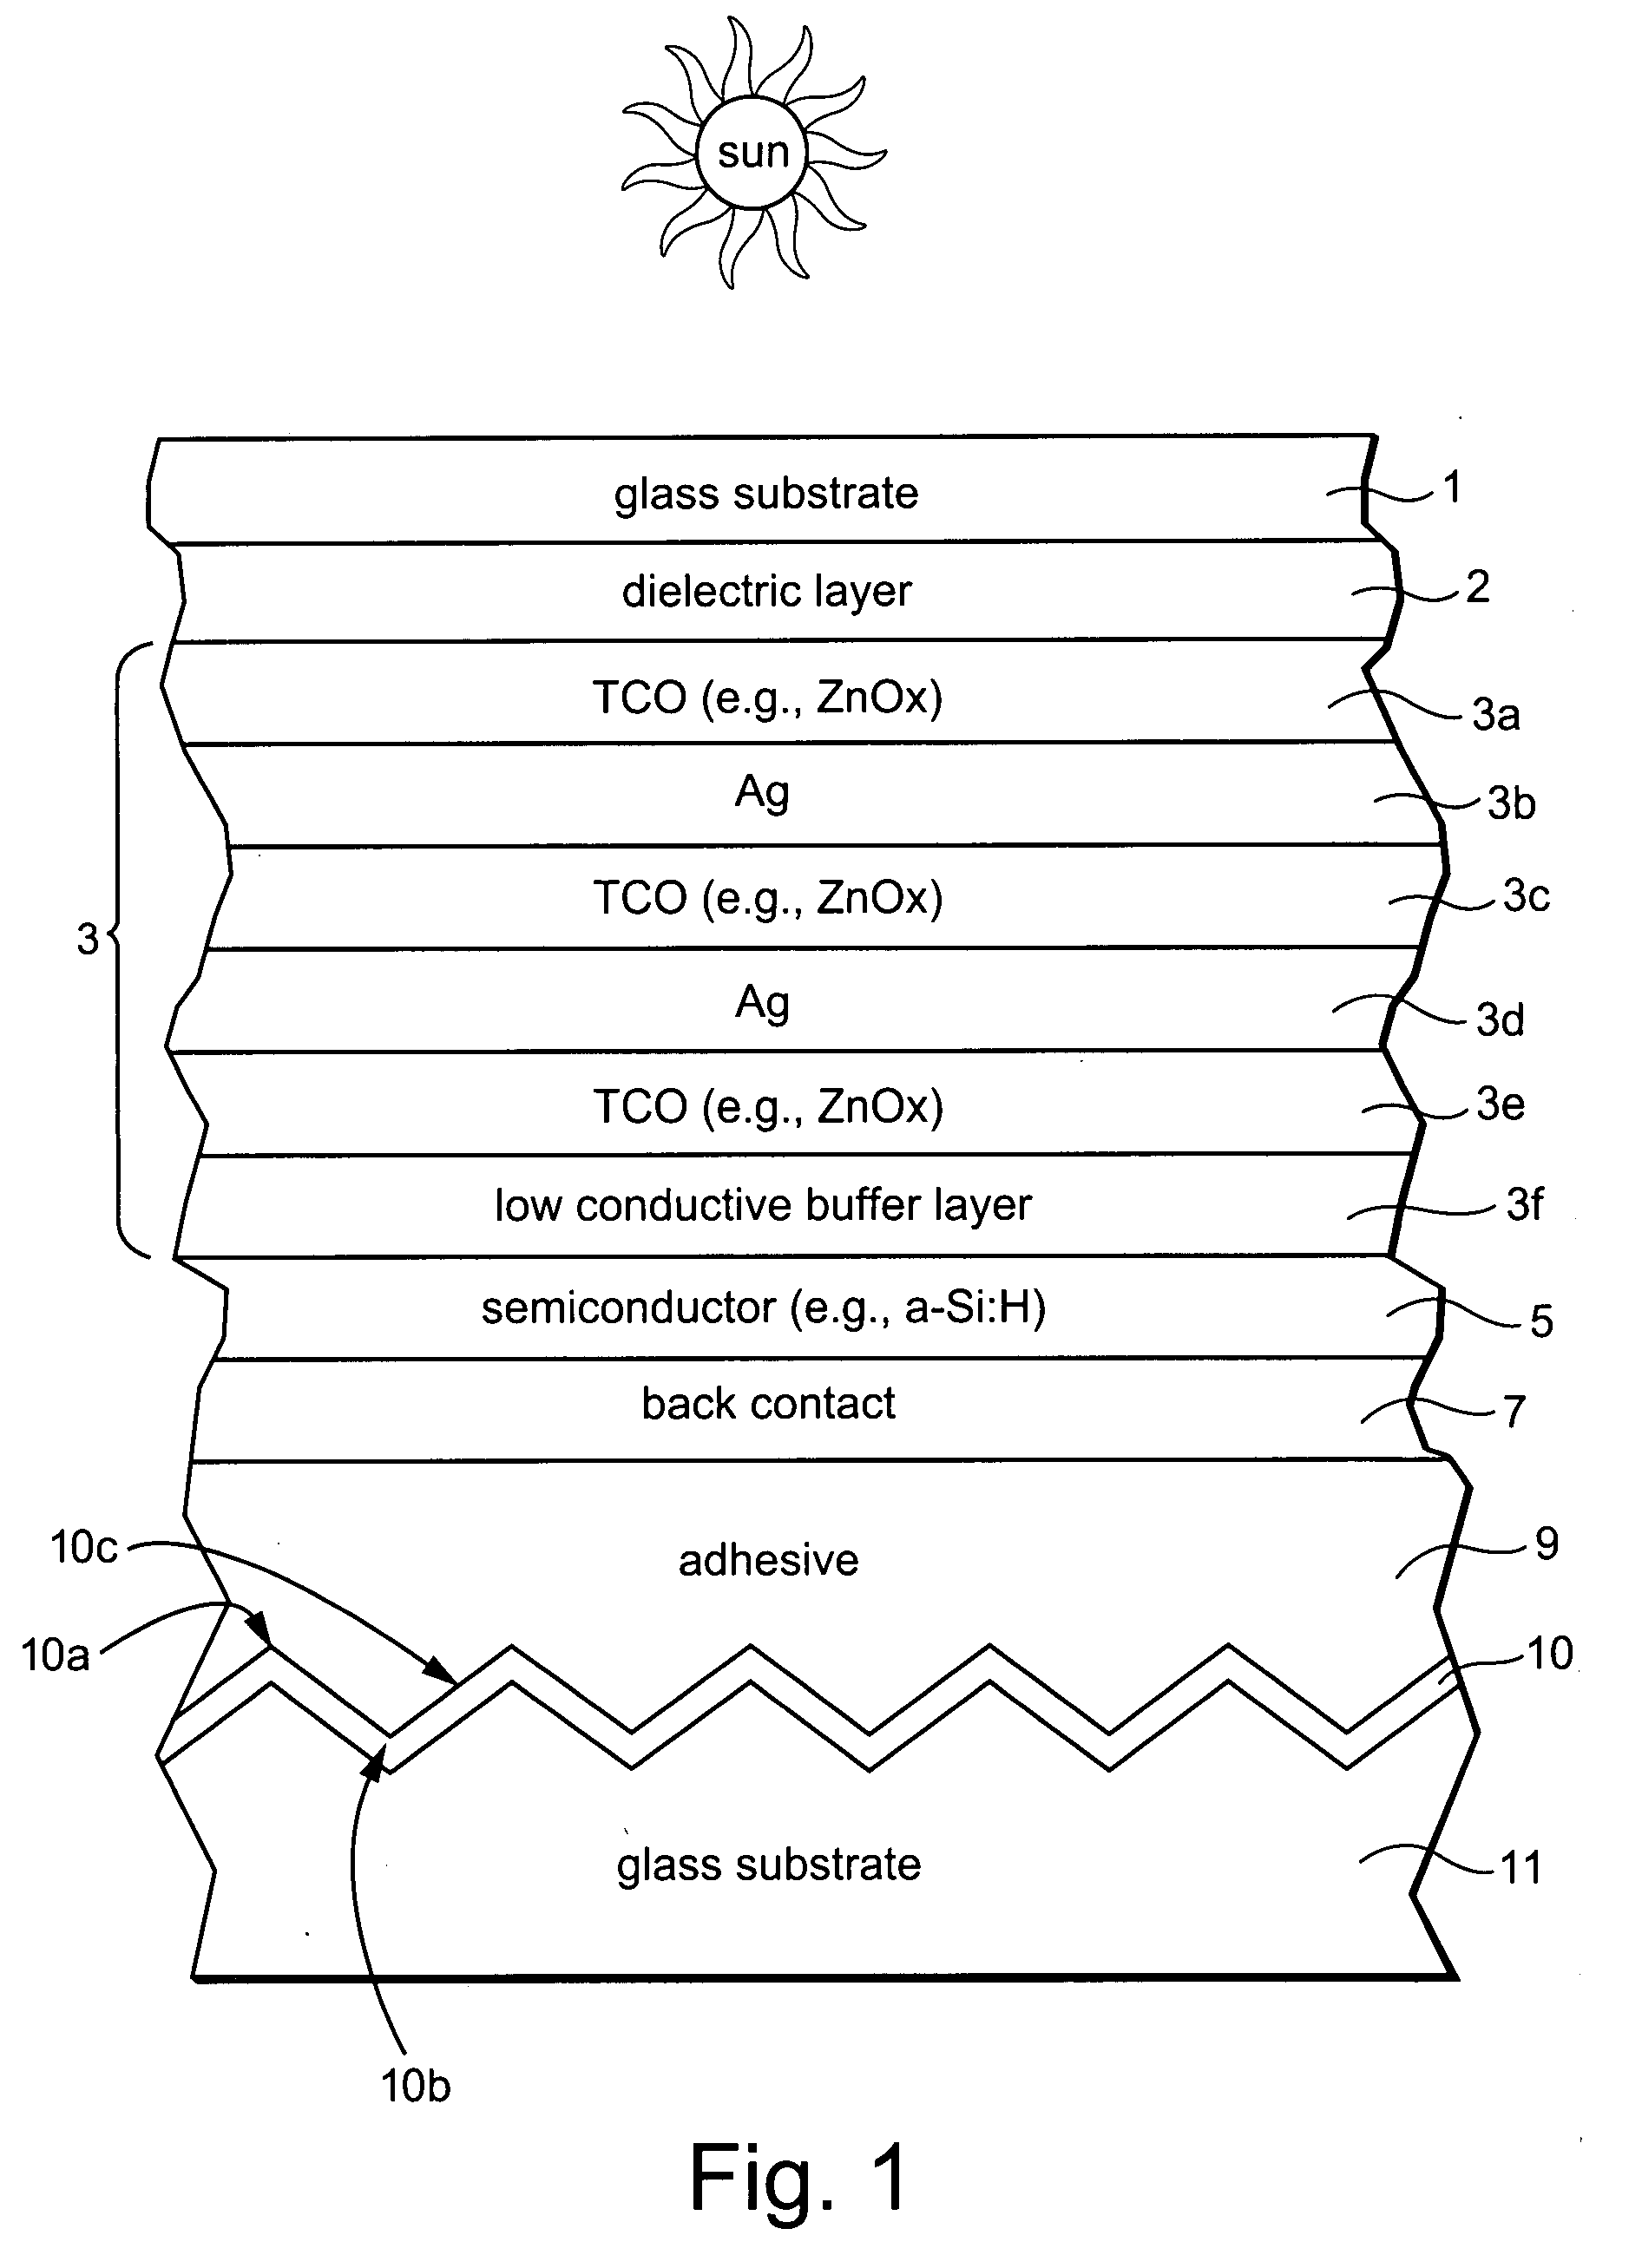 Back reflector for use in photovoltaic device